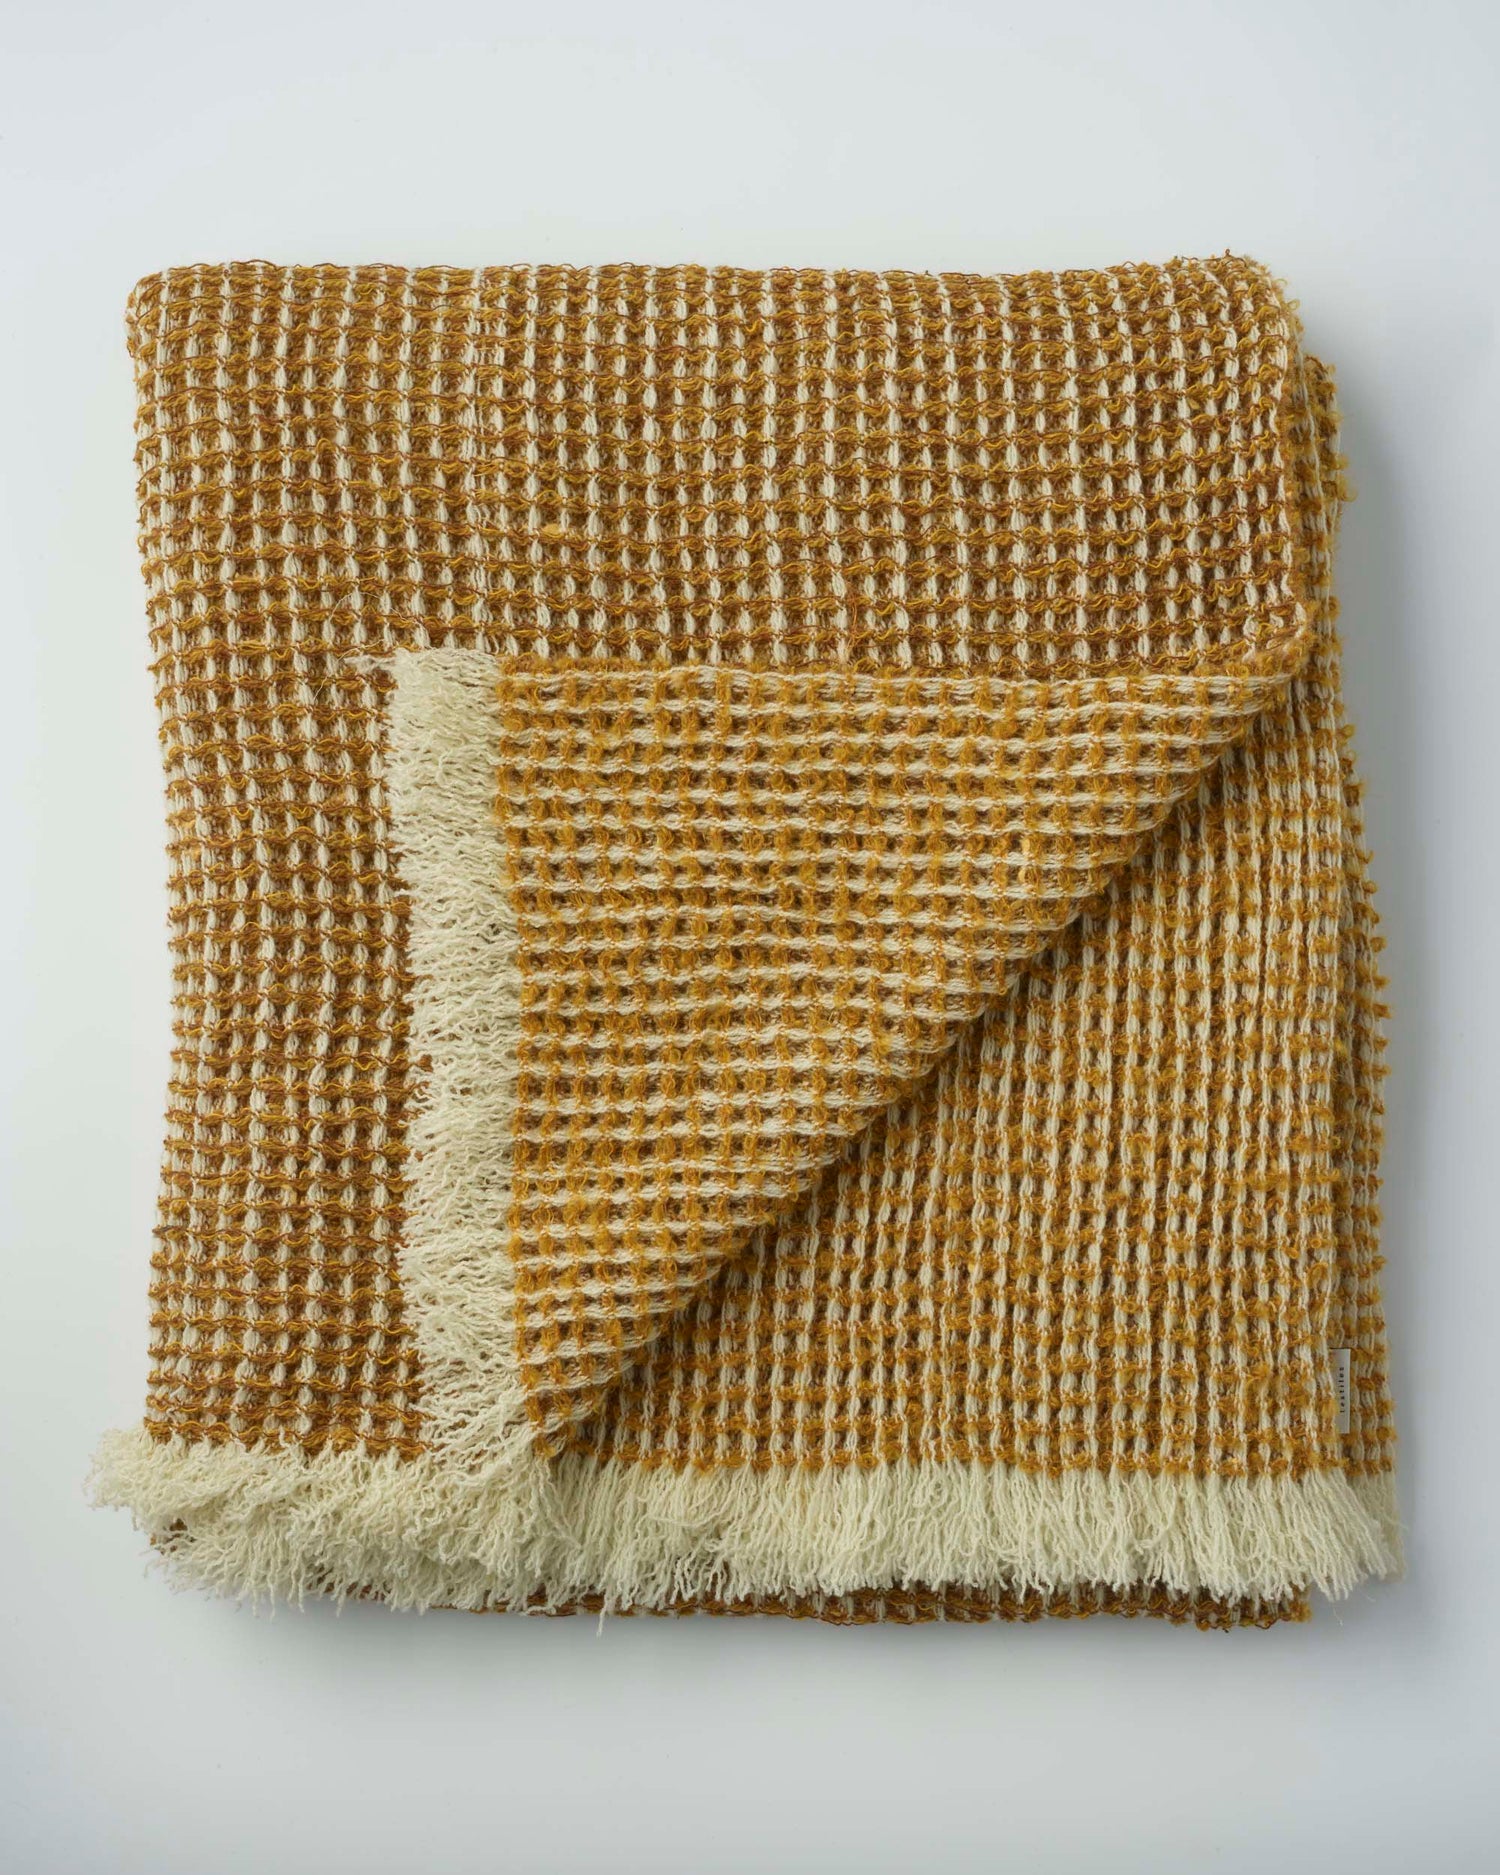 Shiv Textiles Grainne Blanket with Honeycomb Texture made from Deadstock Yarns in the UK